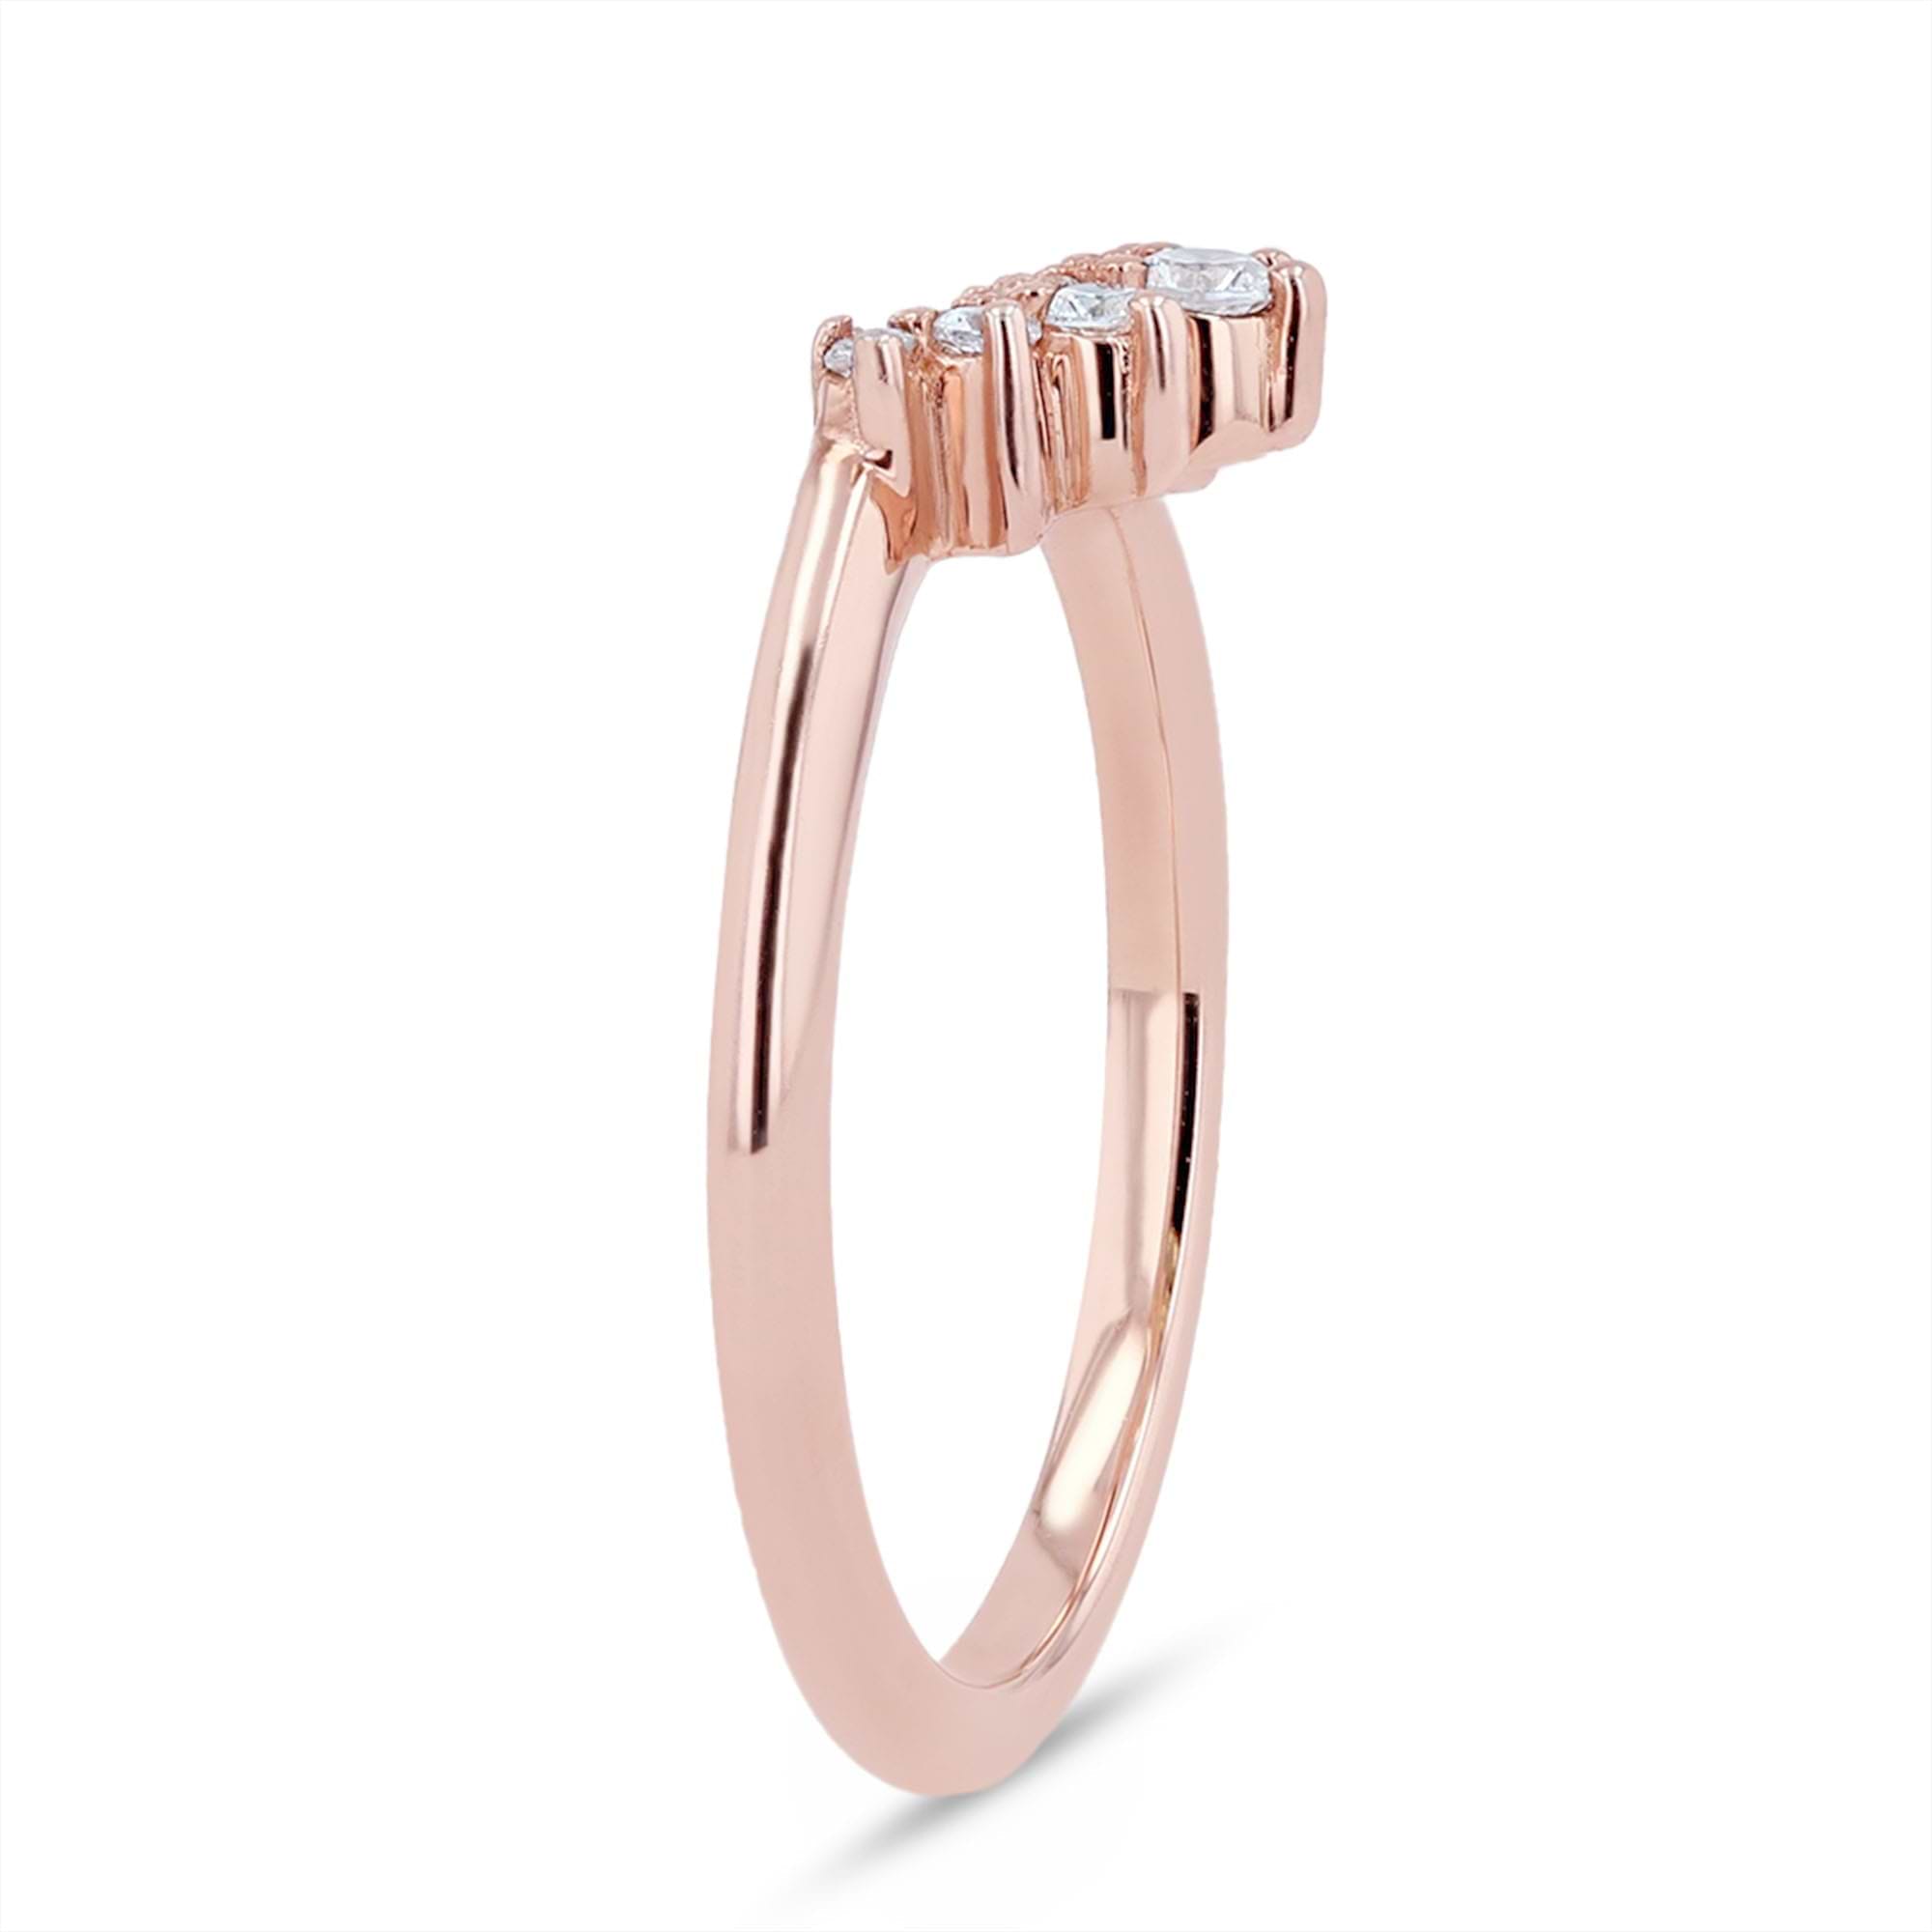 Shown in 14k Rose Gold|Graduated lab grown diamond accented wedding band with contour design set in 14k rose gold